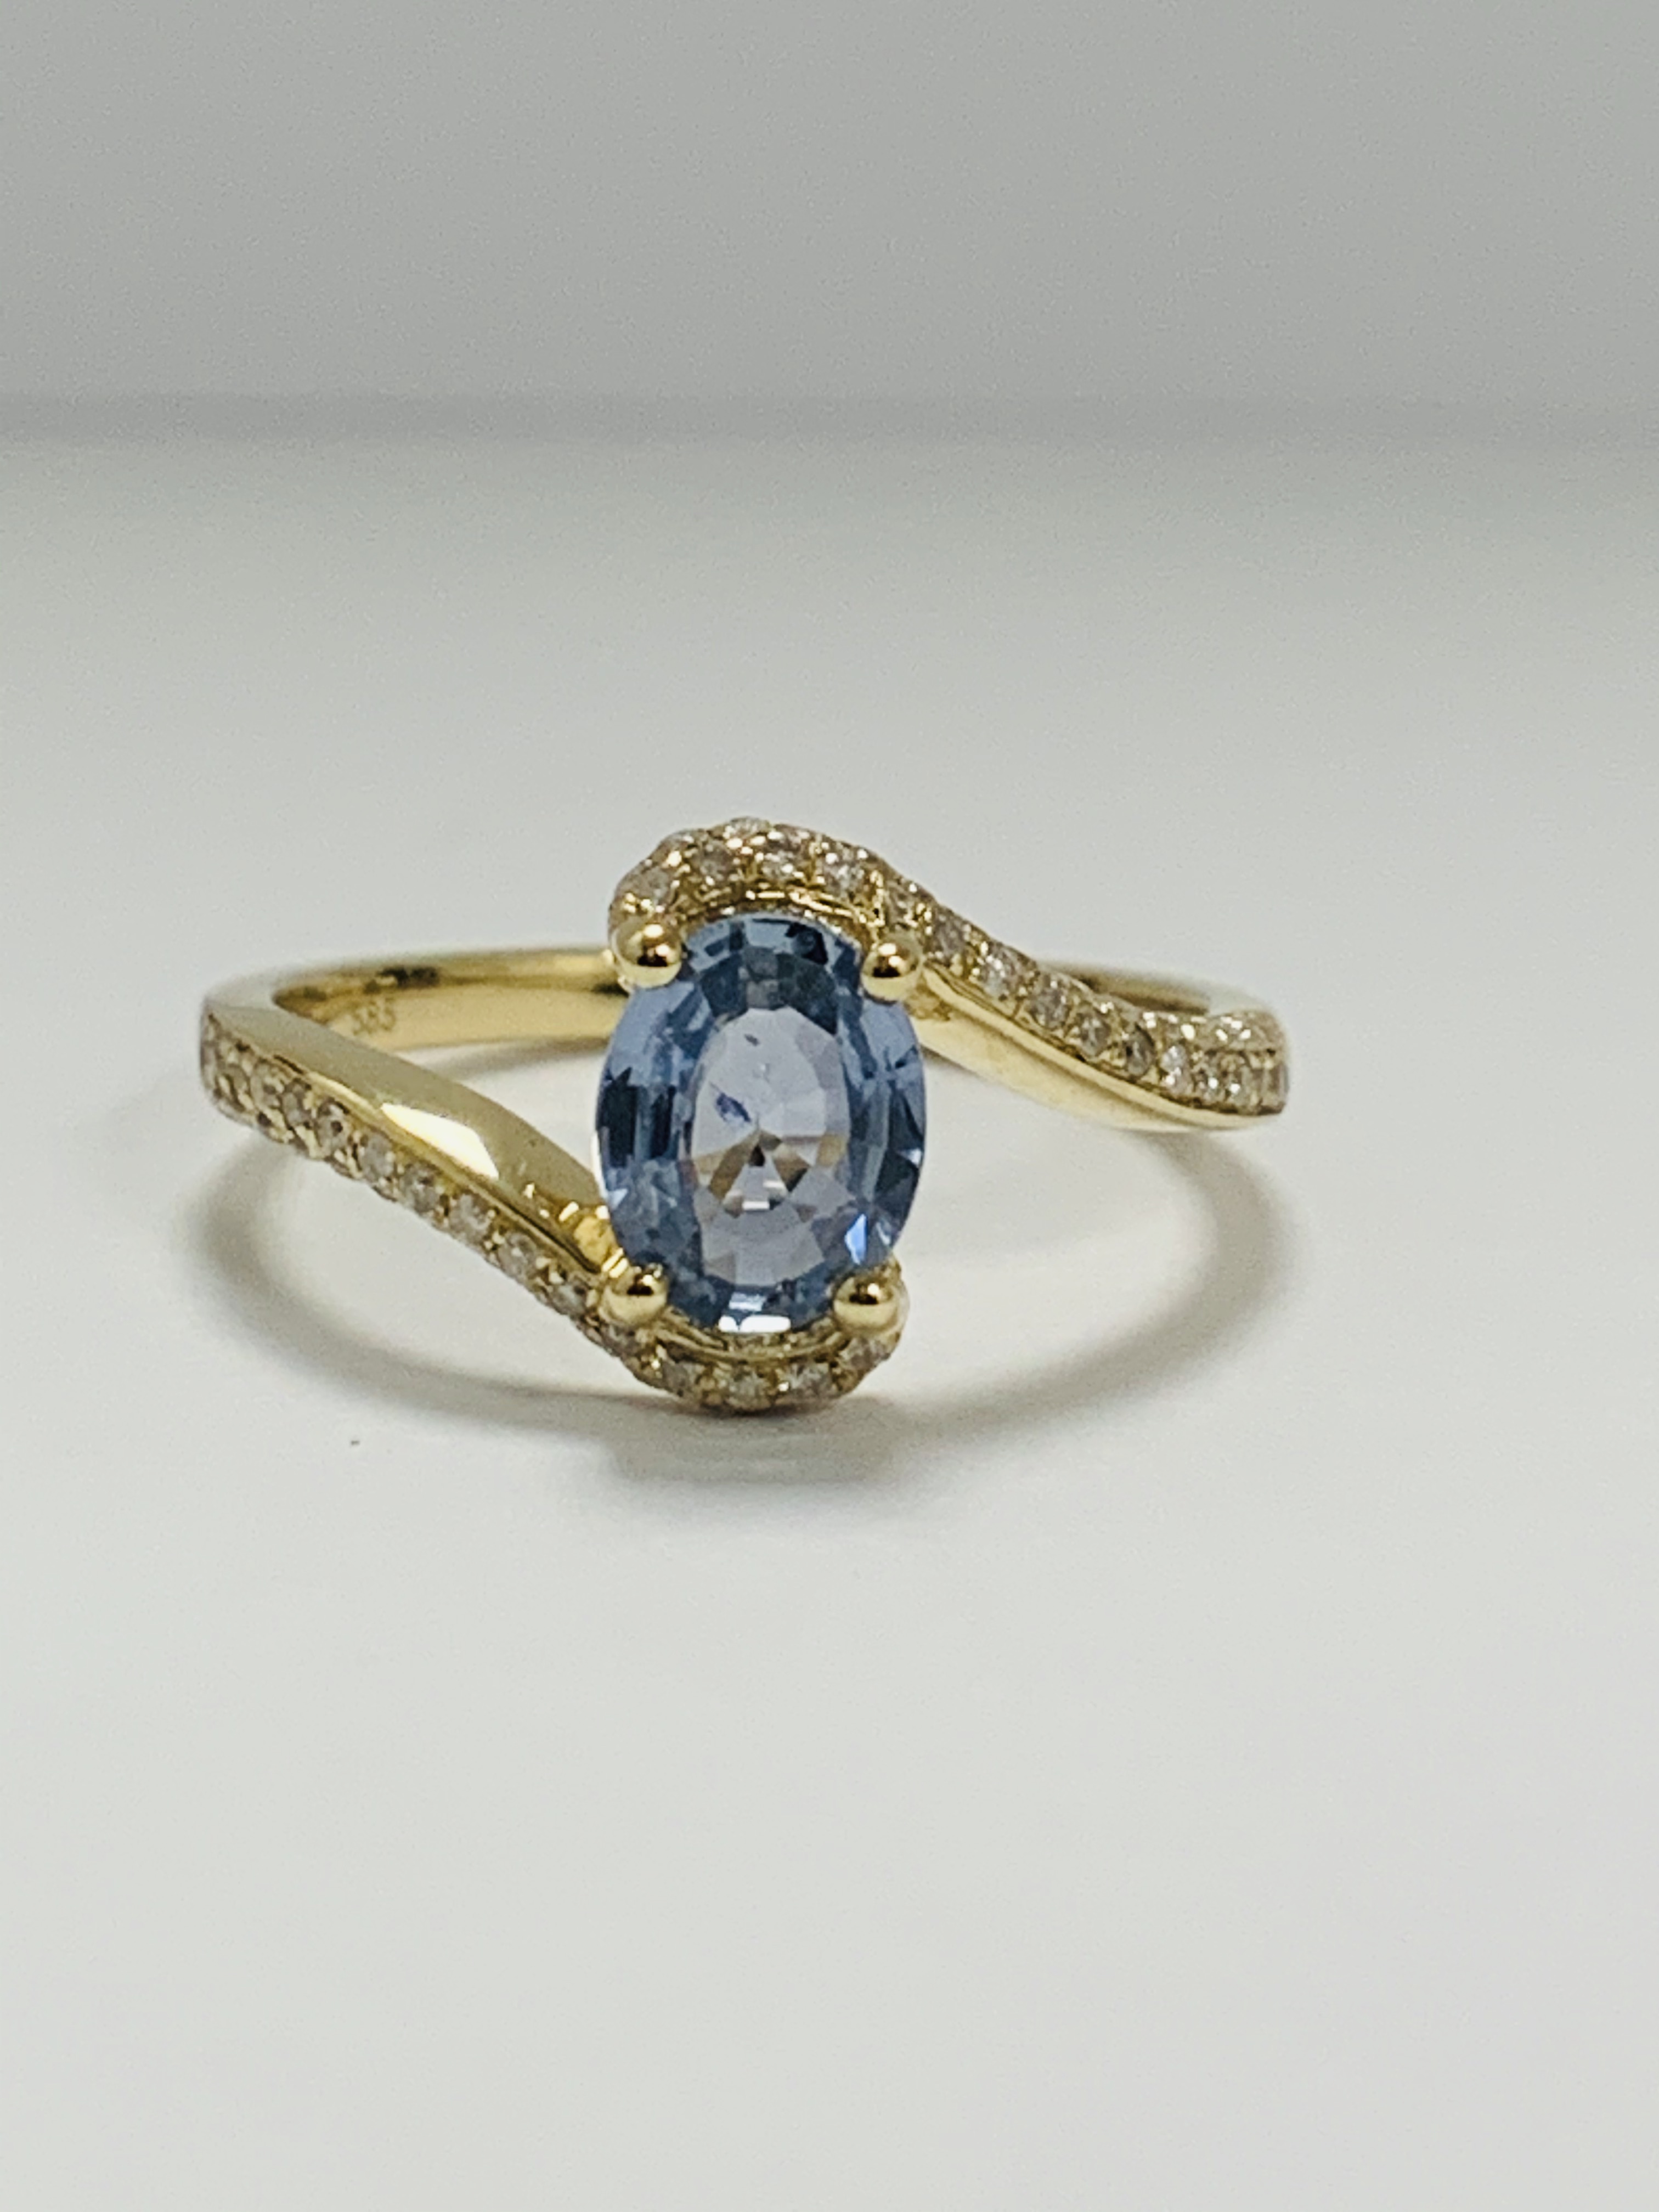 14ct Yellow Gold Sapphire and Diamond ring featuring centre, oval cut, light blue Sapphire (0.77ct), - Image 7 of 10